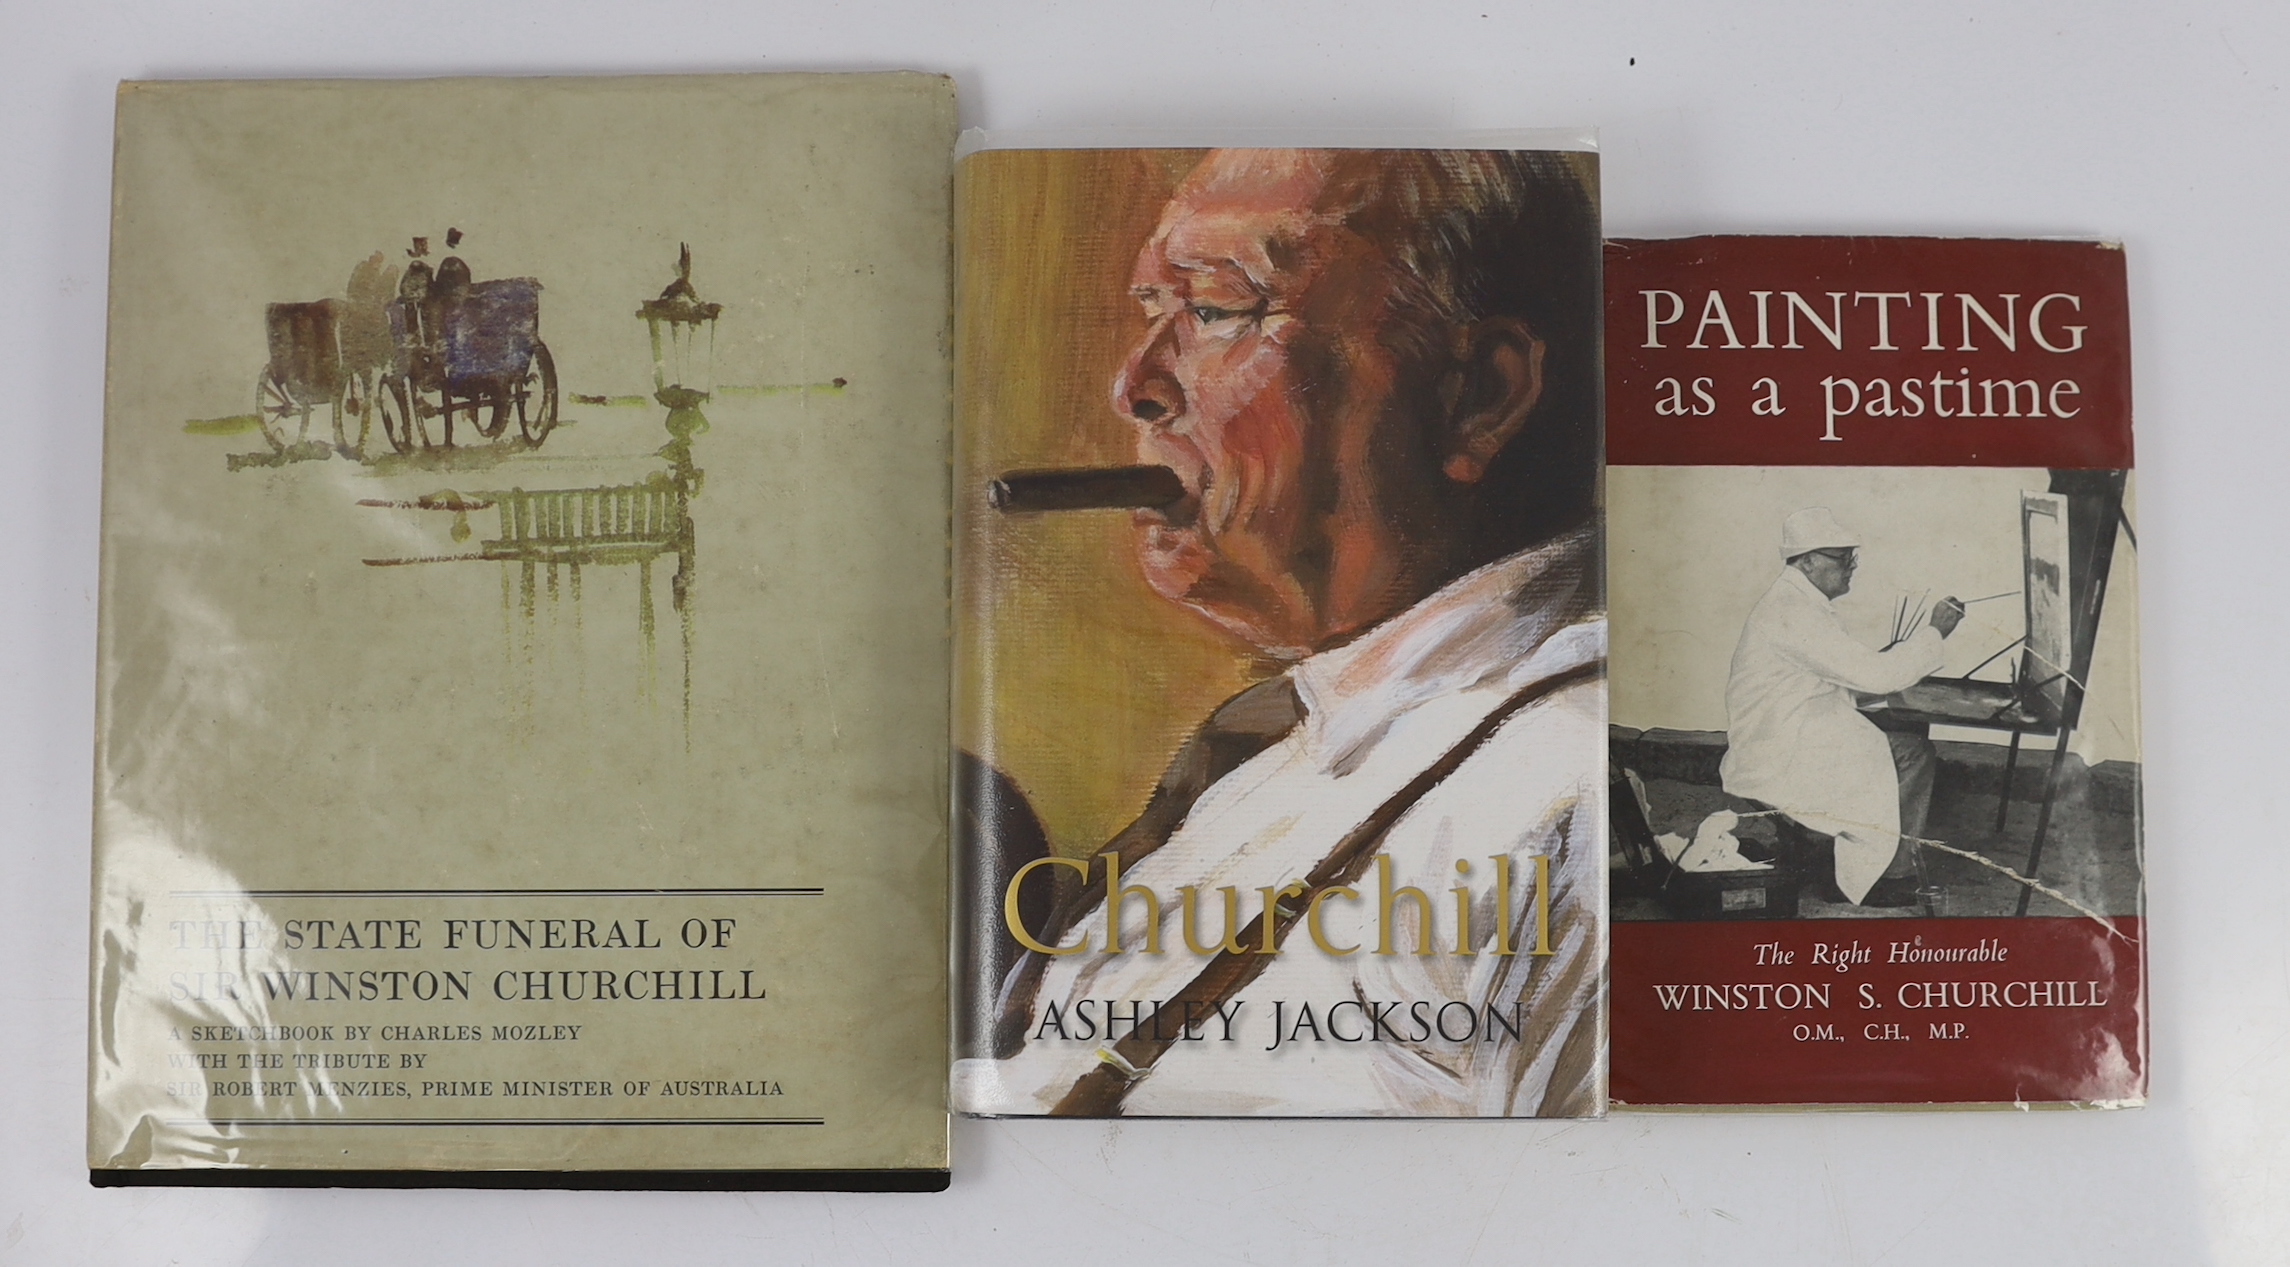 Churchill, Winston S. The Second World War. 6 volumes, 1948-1954. Painting as a Pastime. 1948. Wrappers slightly chipped. Mozeley, Charles. The State Funeral of Sir Winston Churchill. A Sketchbook by Charles Mozley. 1965